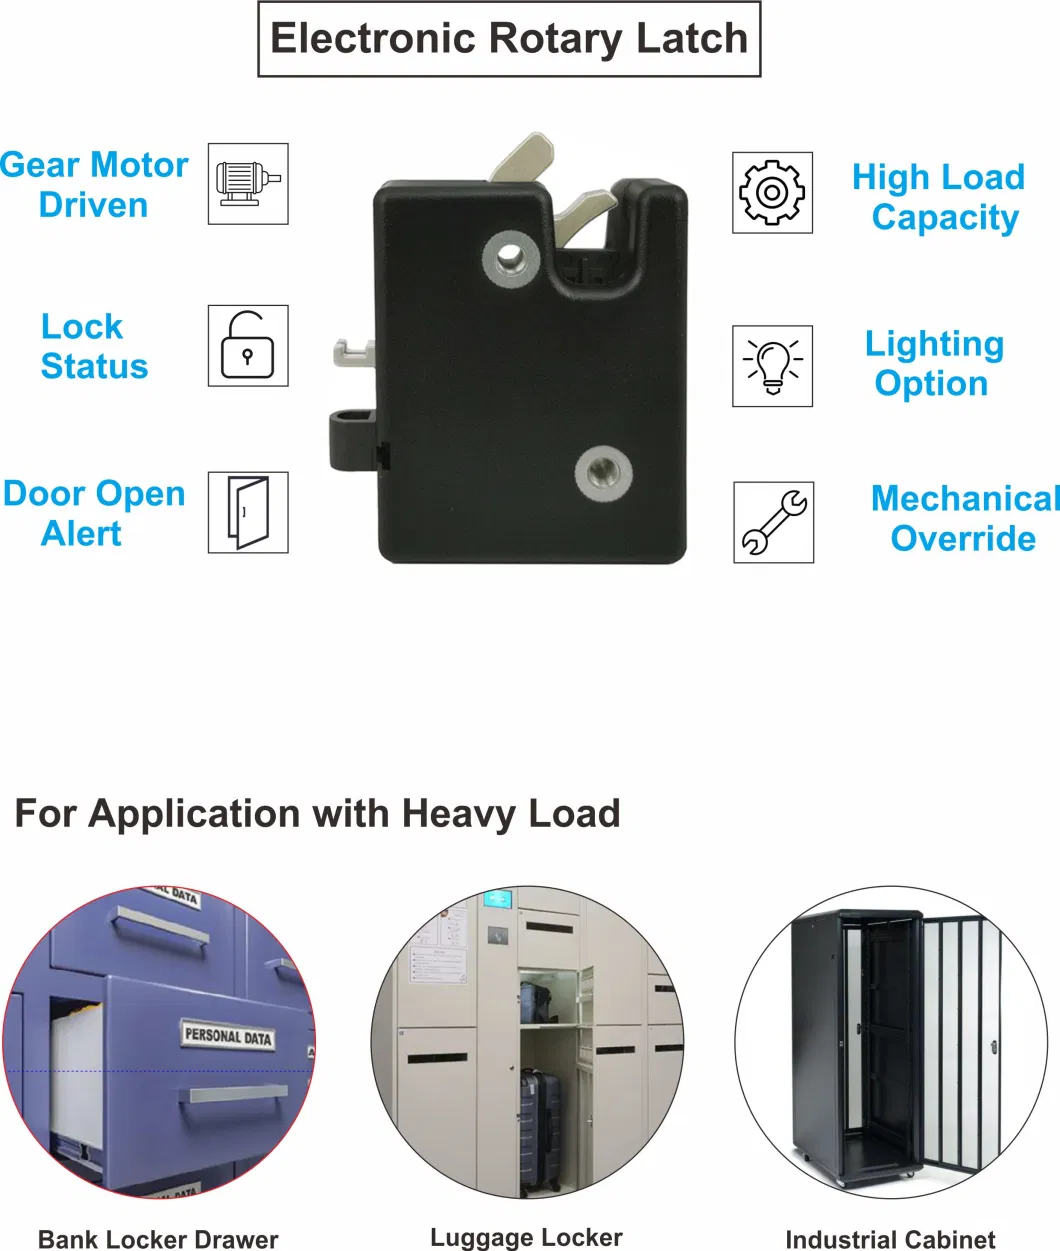 Robust Steel Rotary Latch for Electronic Locker Lock System